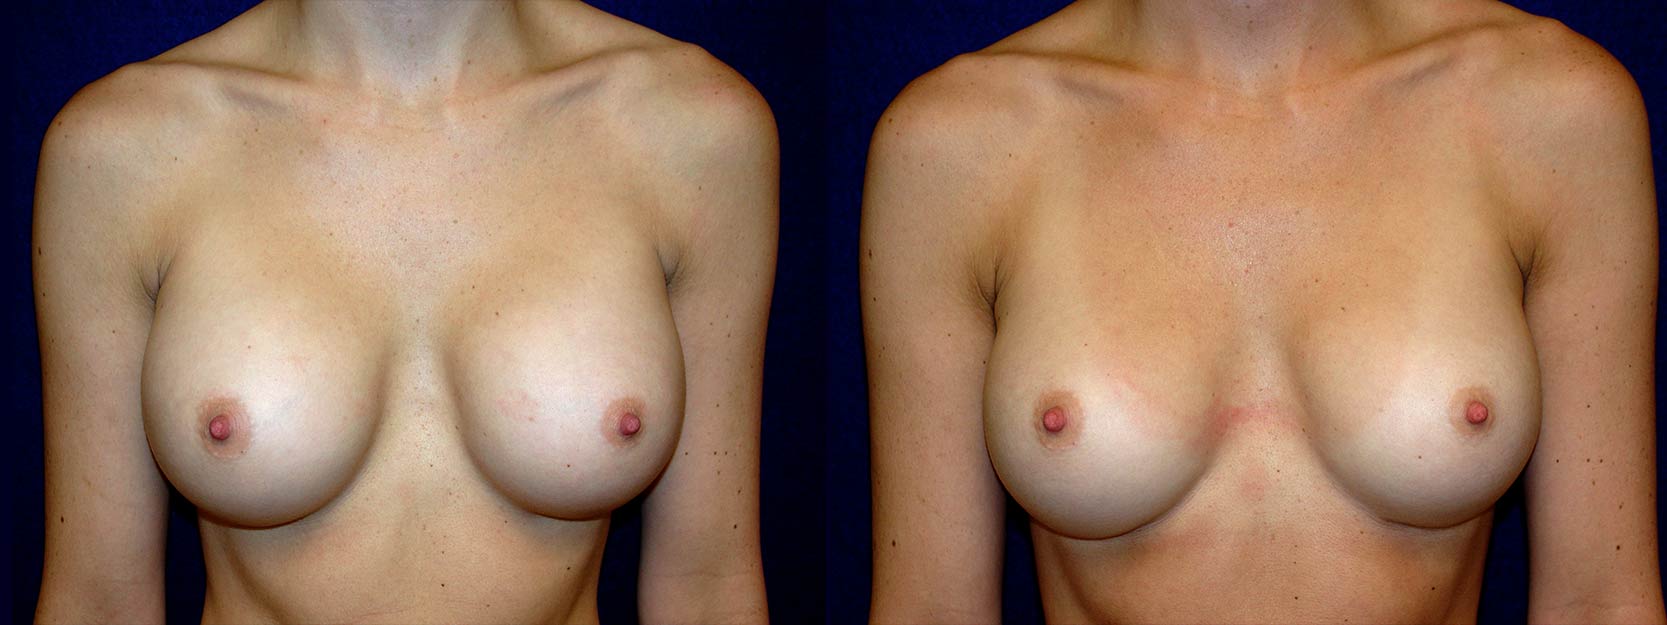 Frontal View - Breast Implant Revision - Silicone Implants